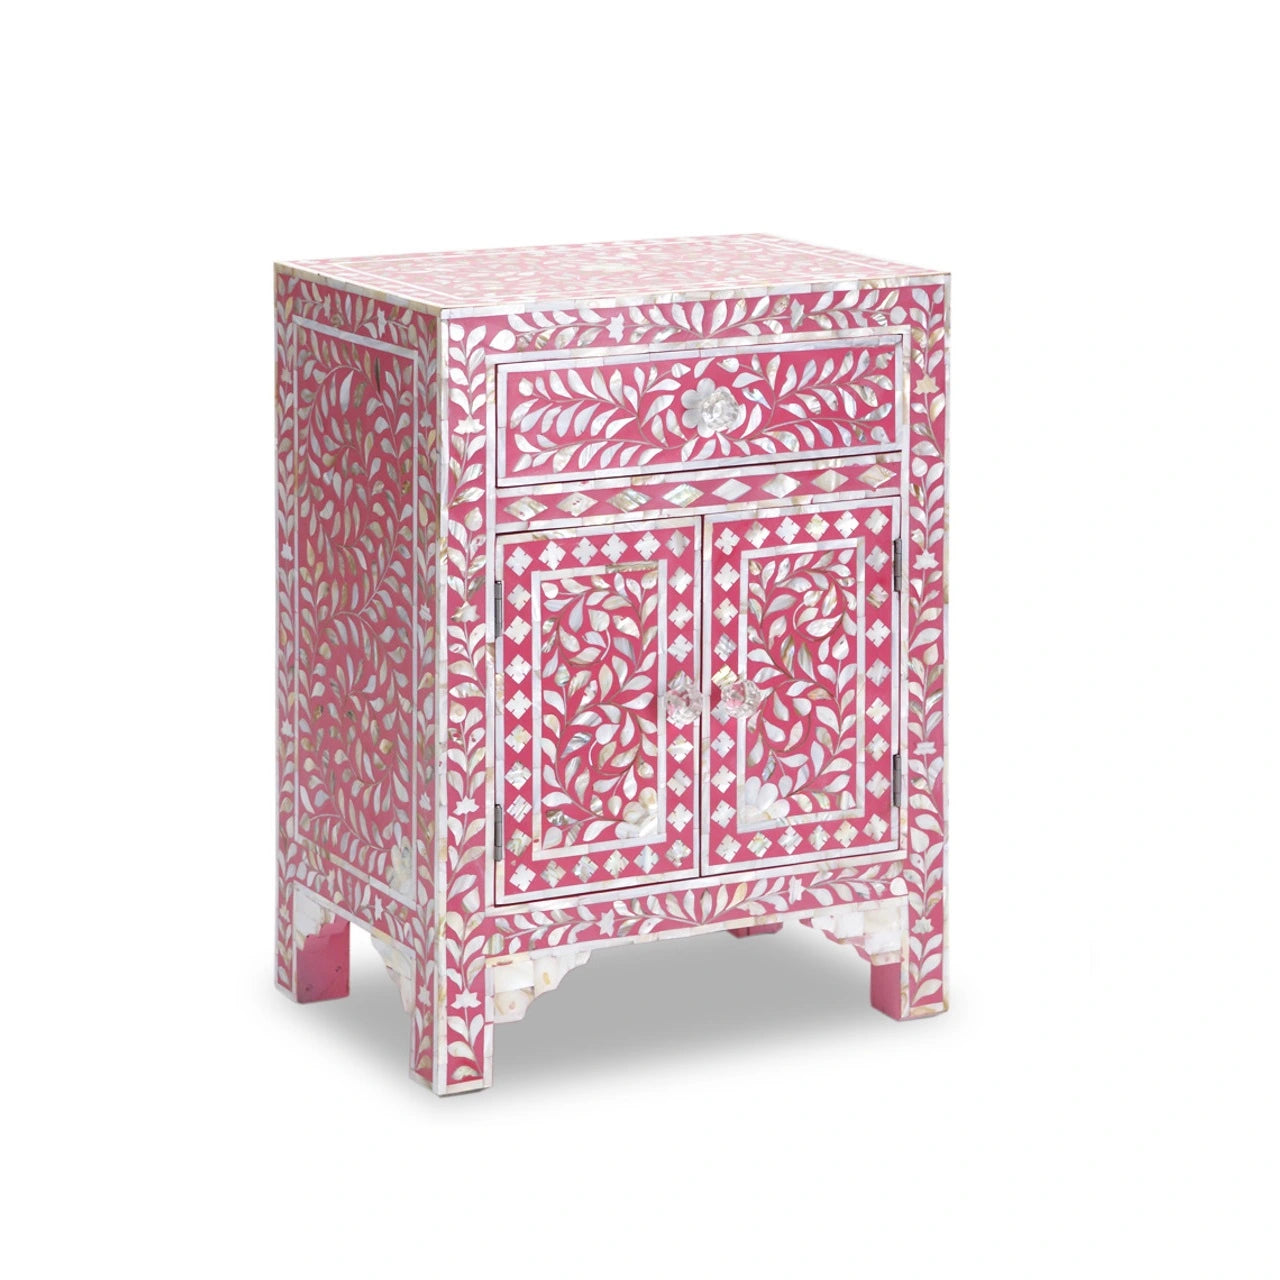 HANDMADE FLORAL PATTERN PINK BONE INLAY FLORAL PATTERN BED SIDE TABLE